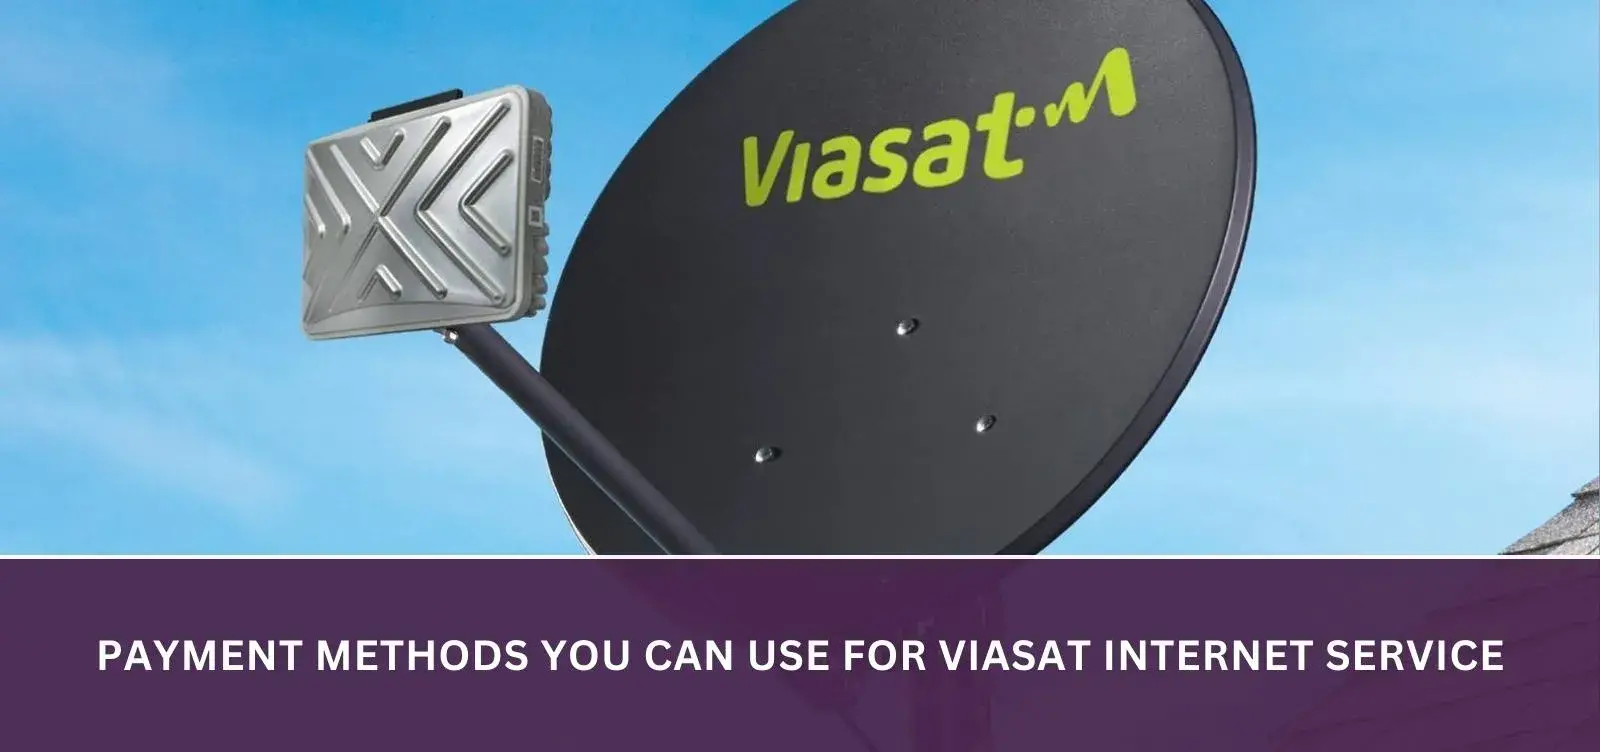 Payment methods you can use for Viasat Internet service